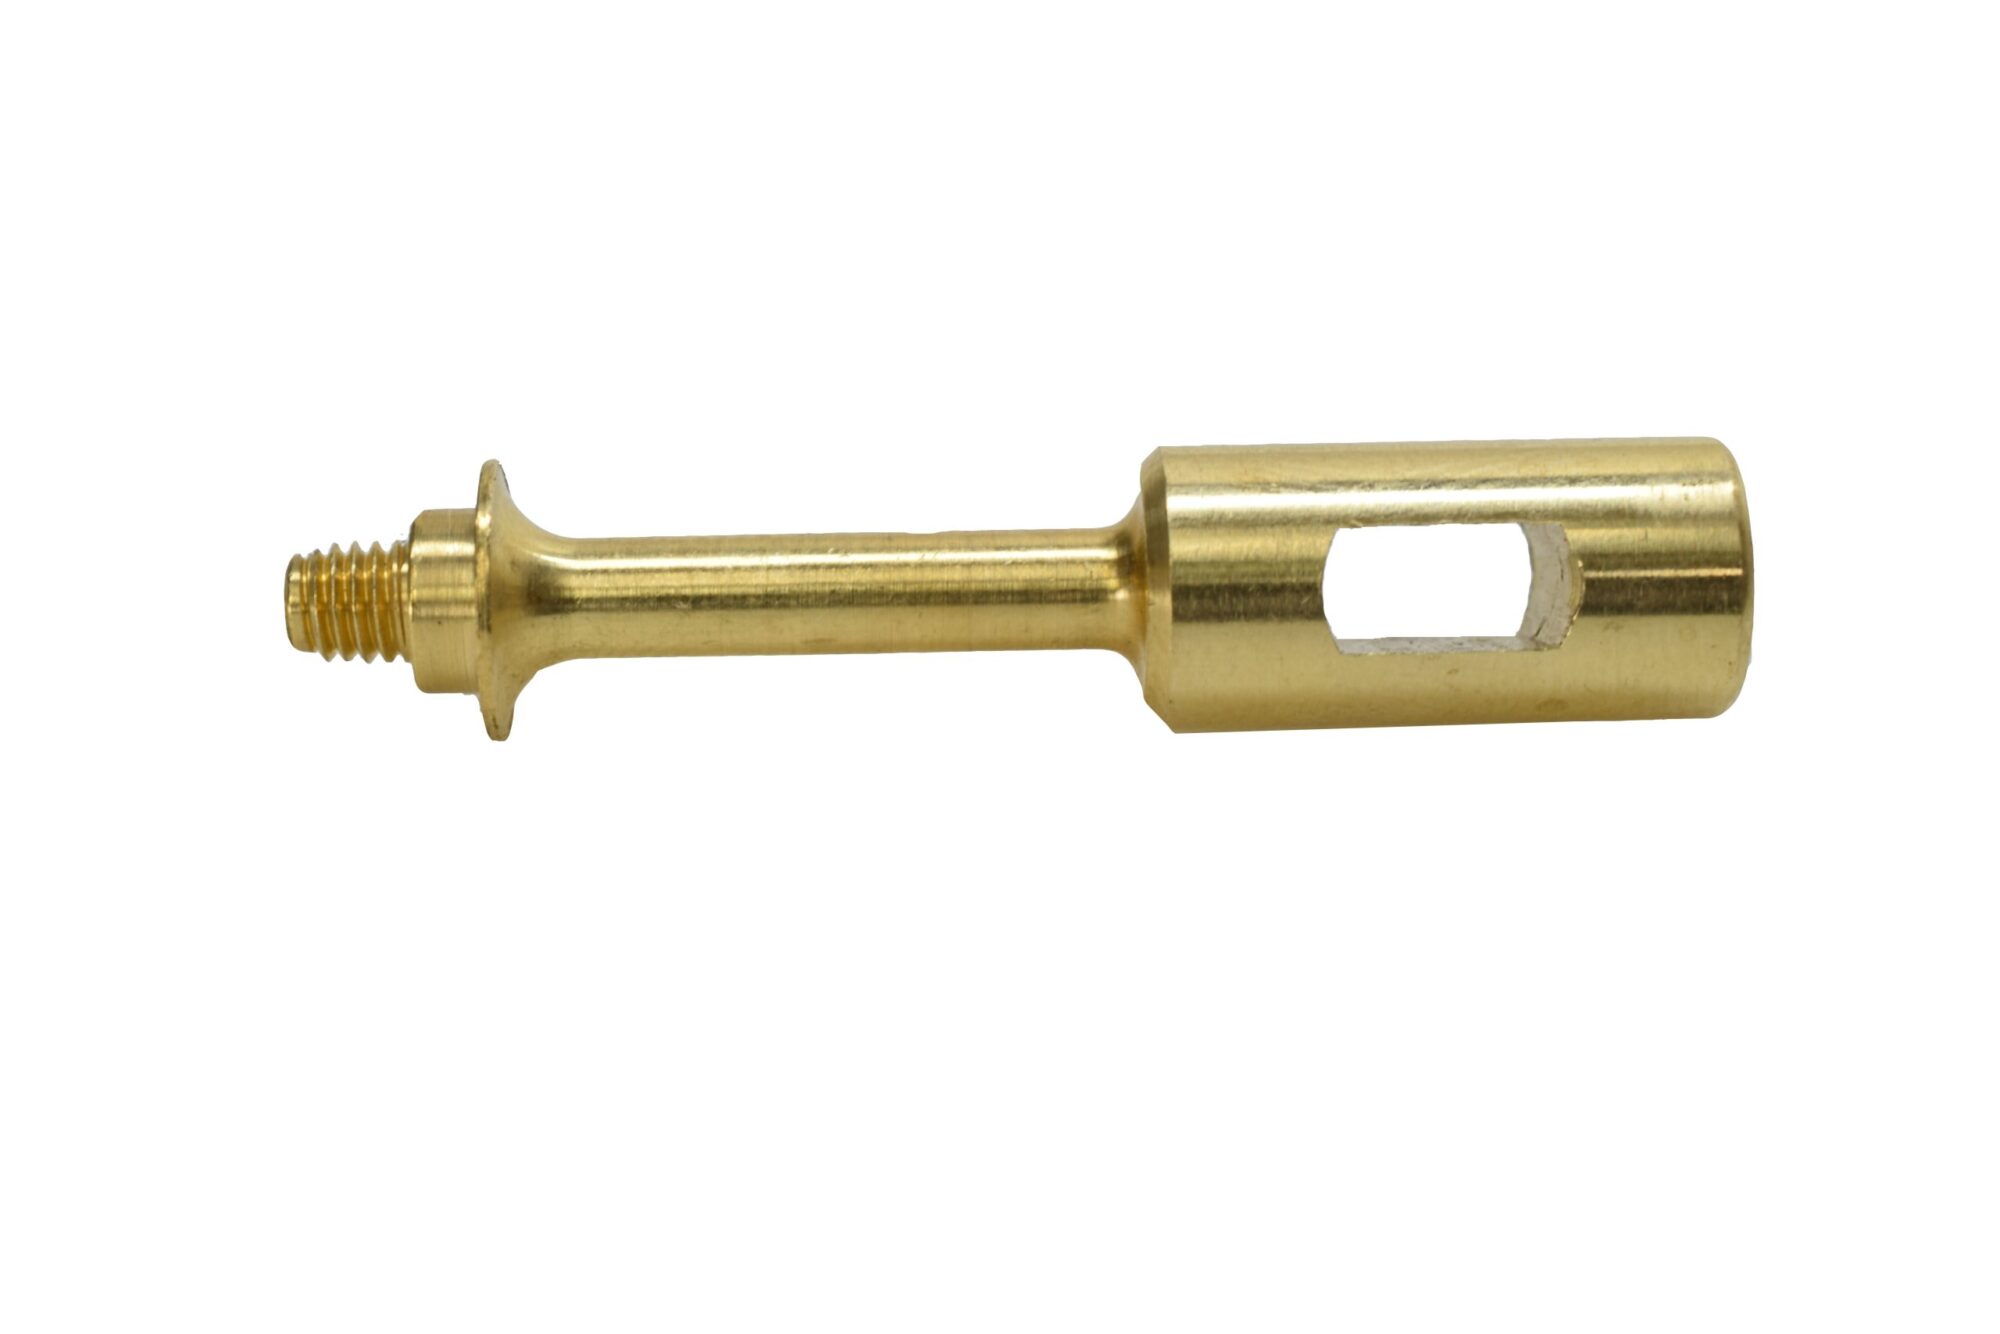 1322B Brass Shaft Alone - Less Nut and Washer